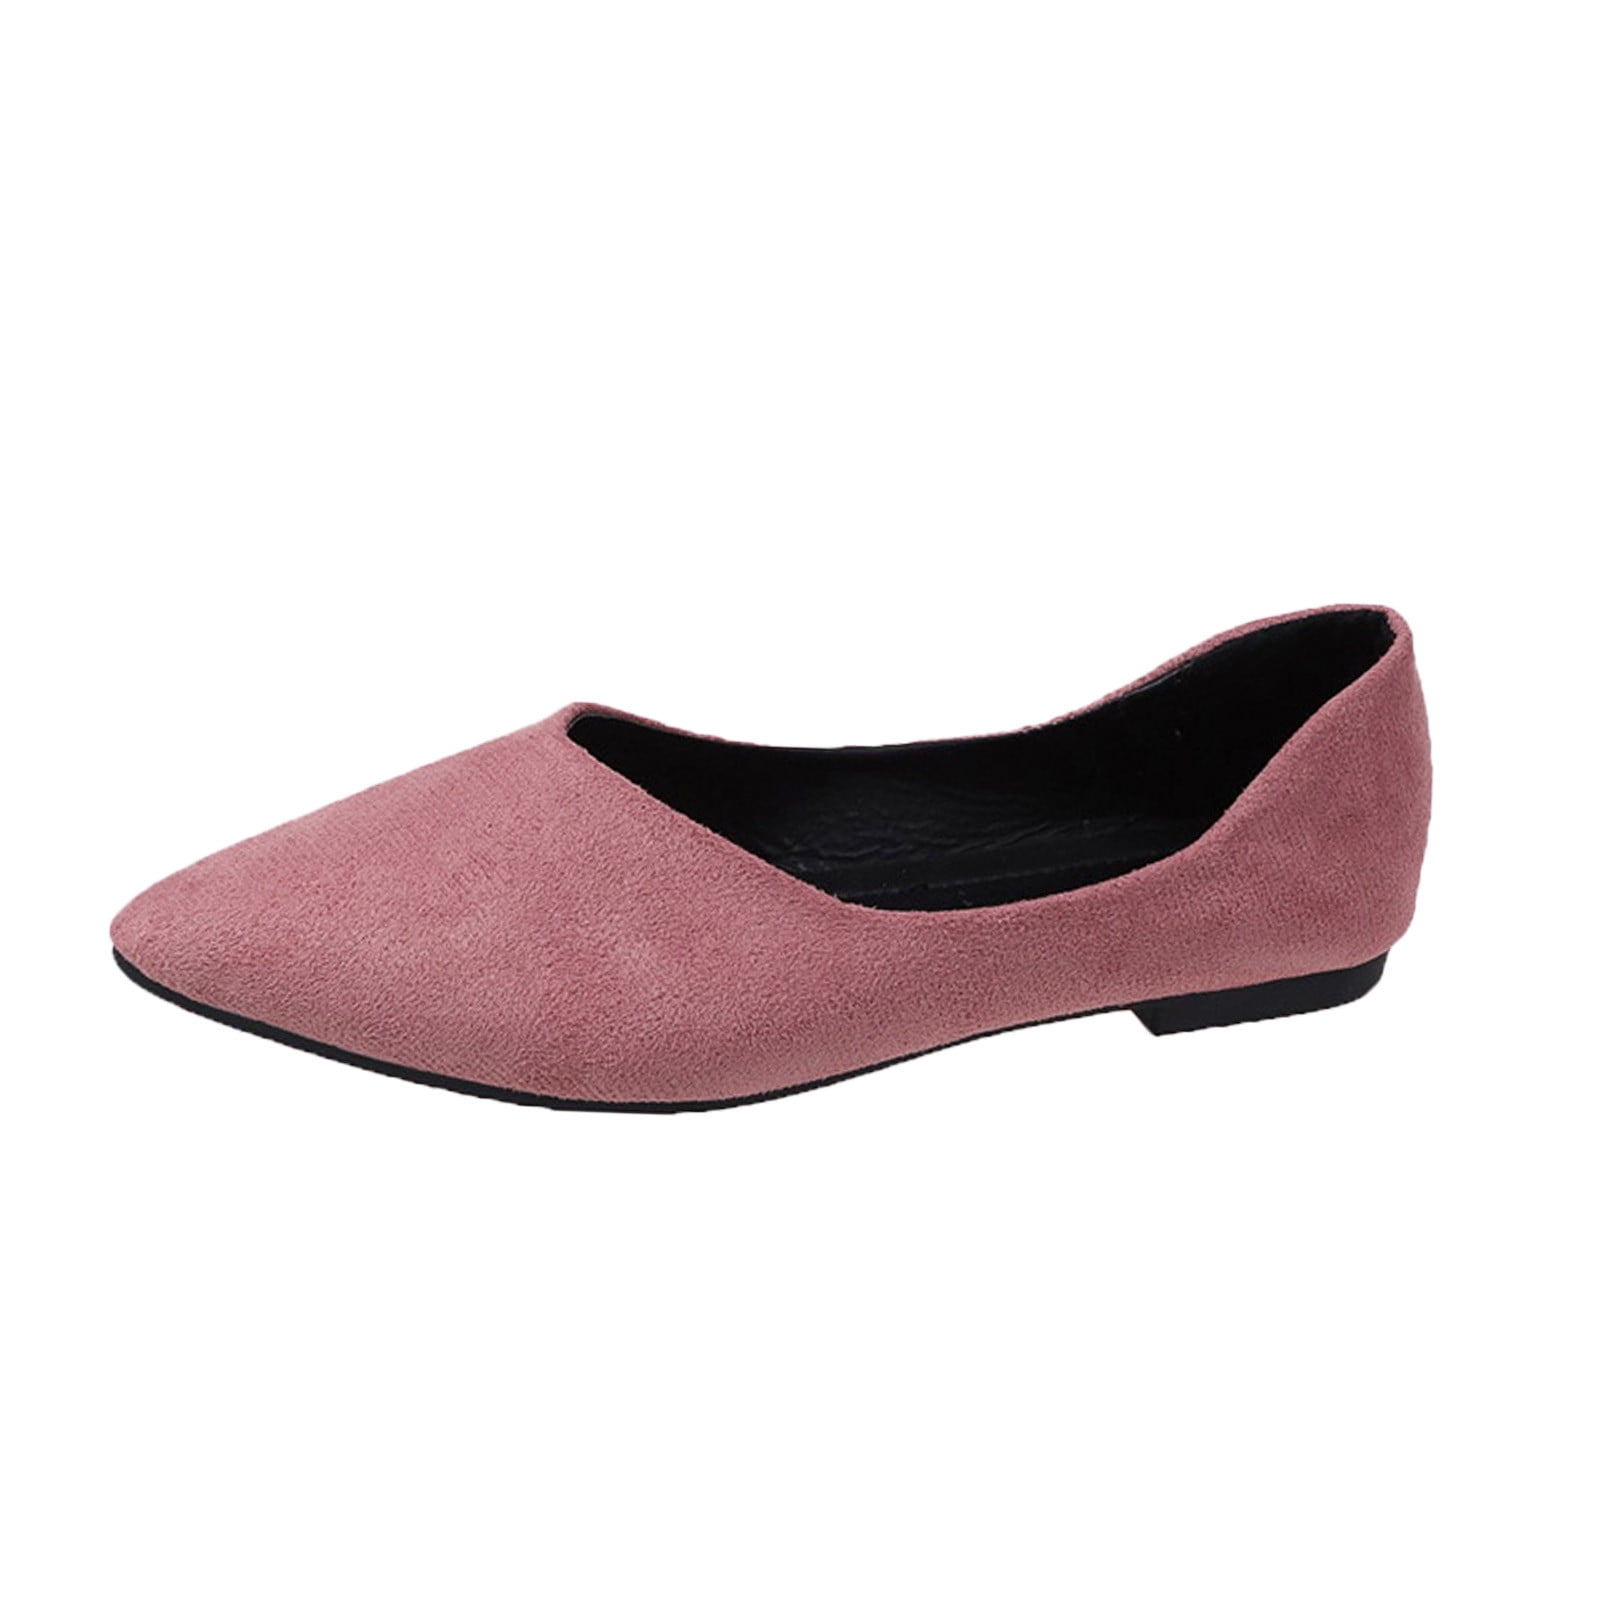 Lovskoo 2024 Women's Ballet Flat Shoes Faux Suede Dress Shoes Pointed Toe  Slip On Leather Top Casual Comfortable Loafer Shoes Indoor Outdoor Pink 